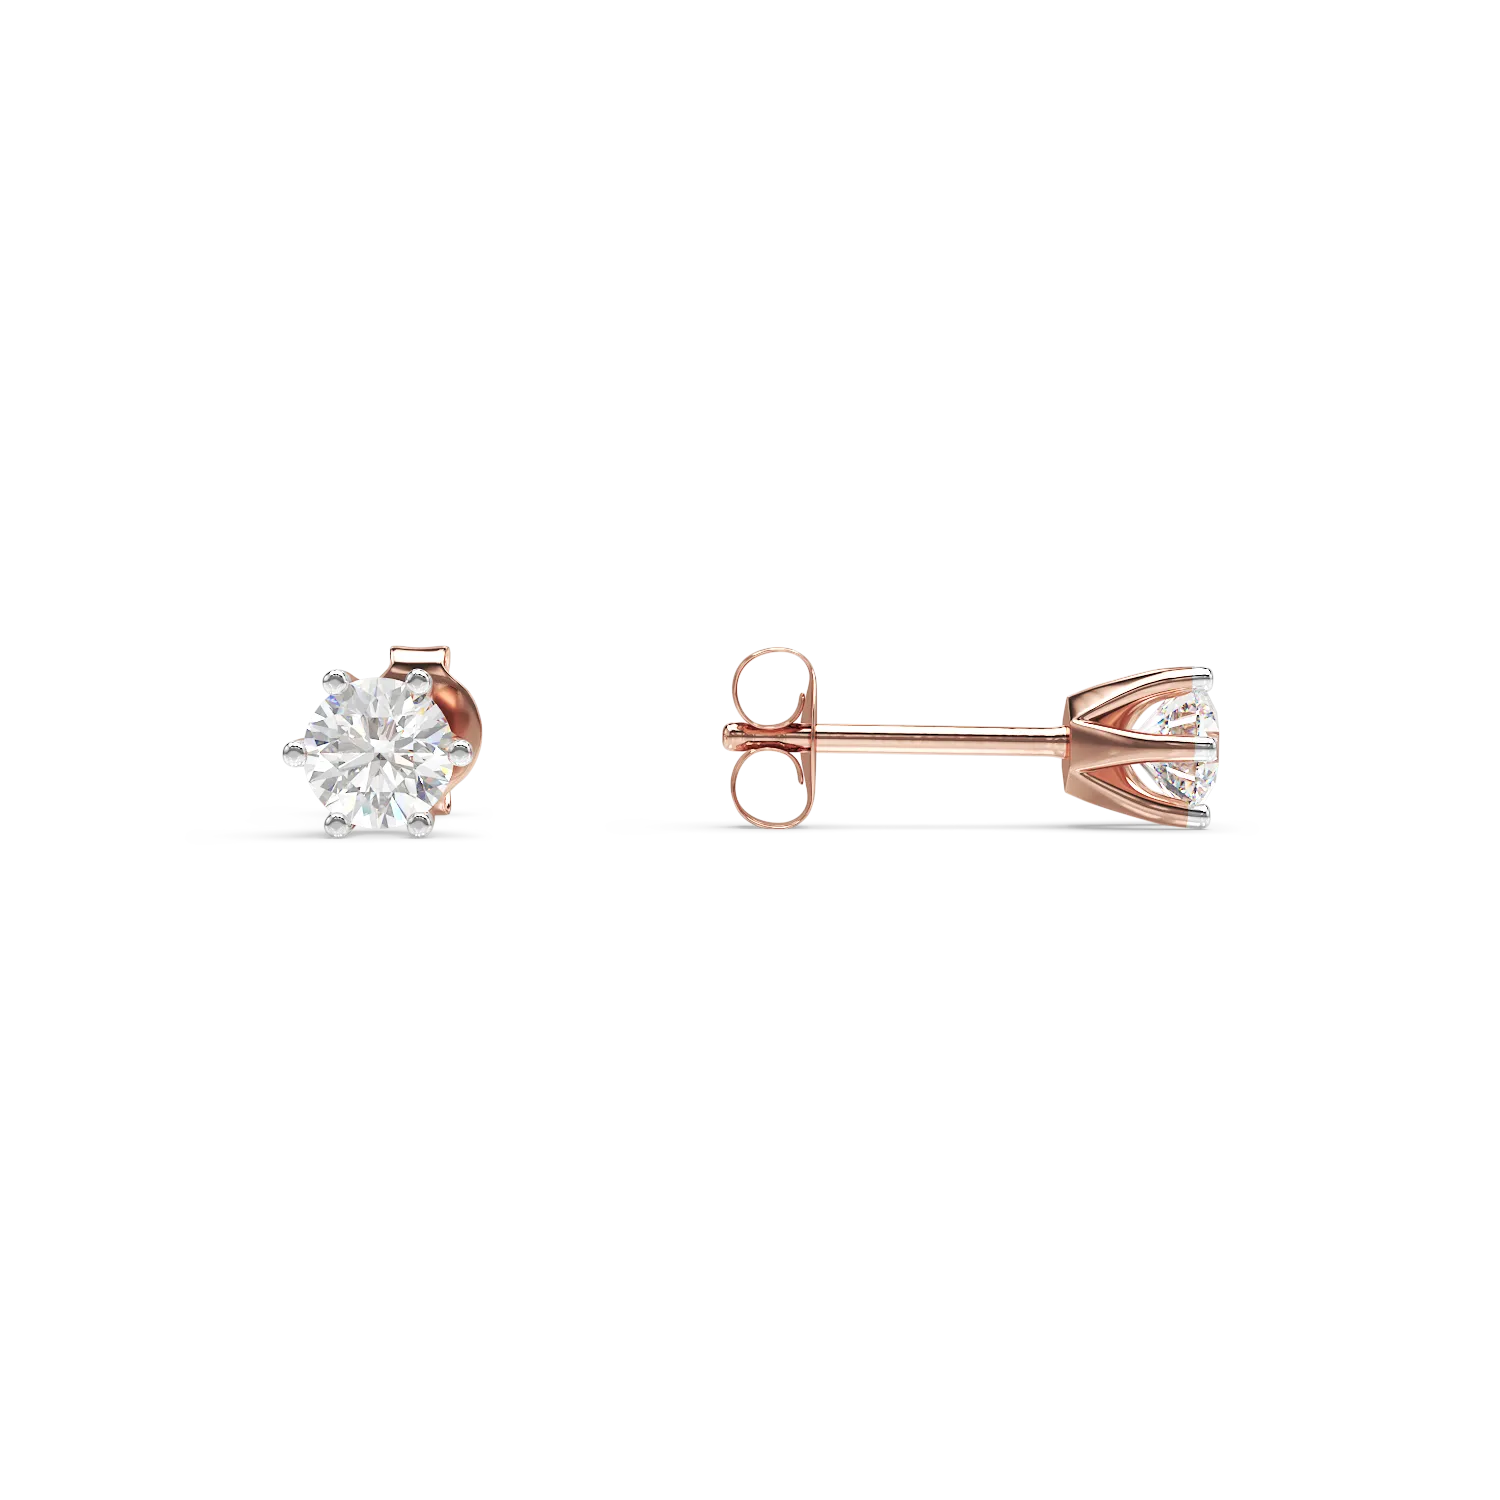 Rose gold earrings with 0.3ct solitaire diamonds